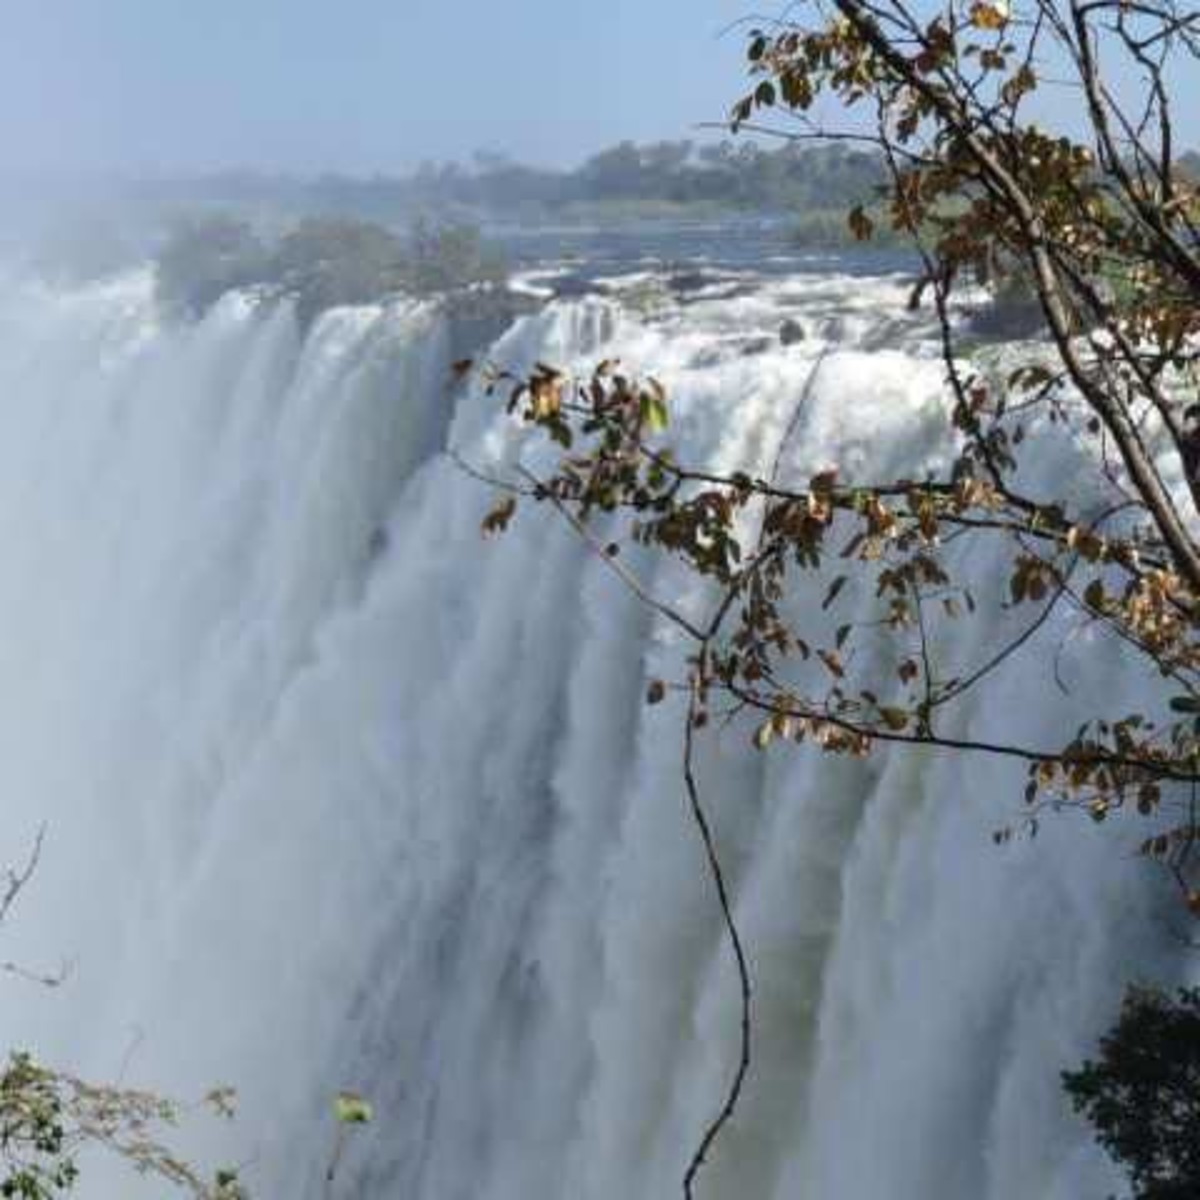 4,700 Cubic Meters of Water go over the Falls per Second!